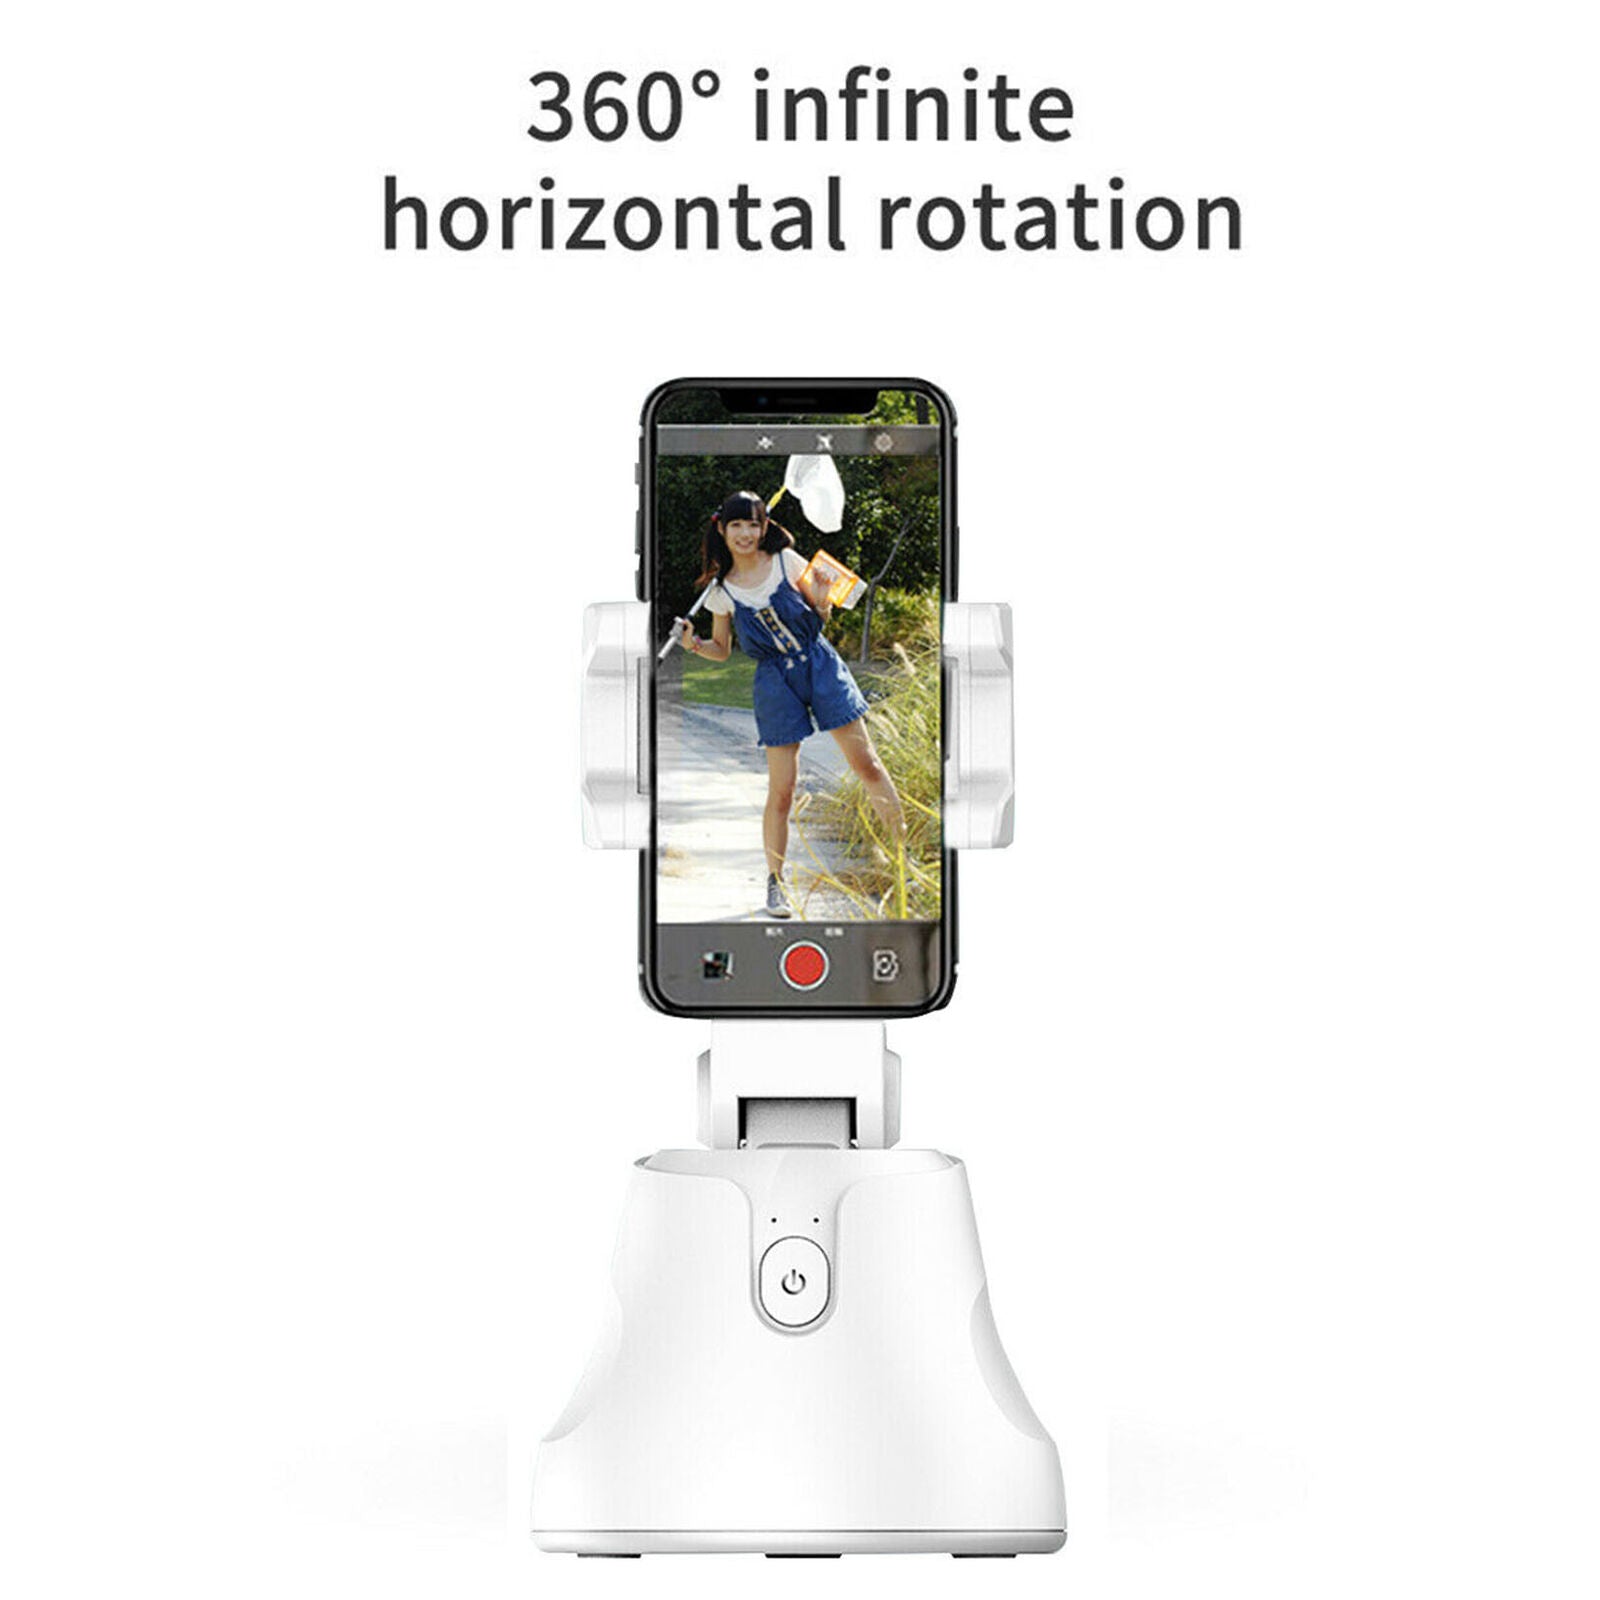 360 degree Rotation Auto AI Tracking Smart Shooting Holder Cell Phone Holder